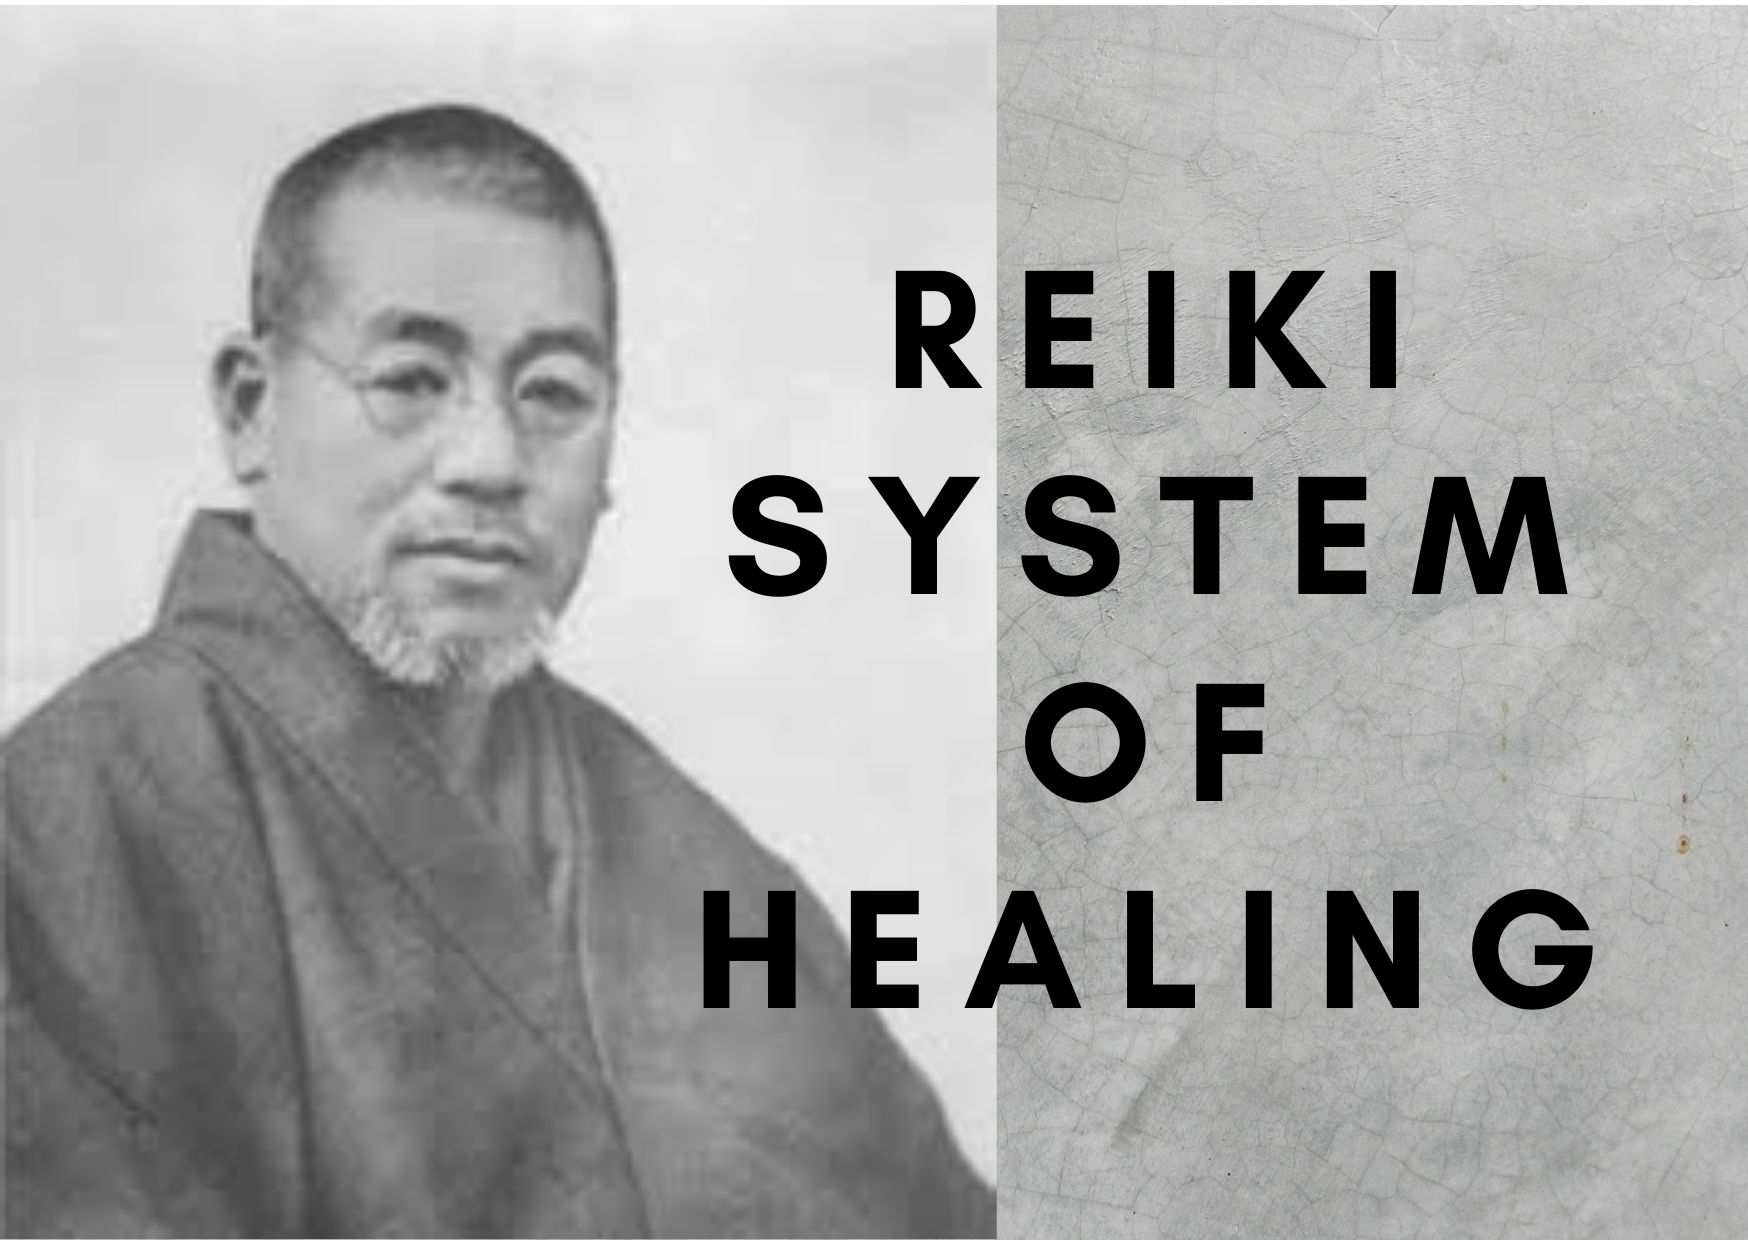 Reiki System Of Natural Healing - Know Some Facts About It